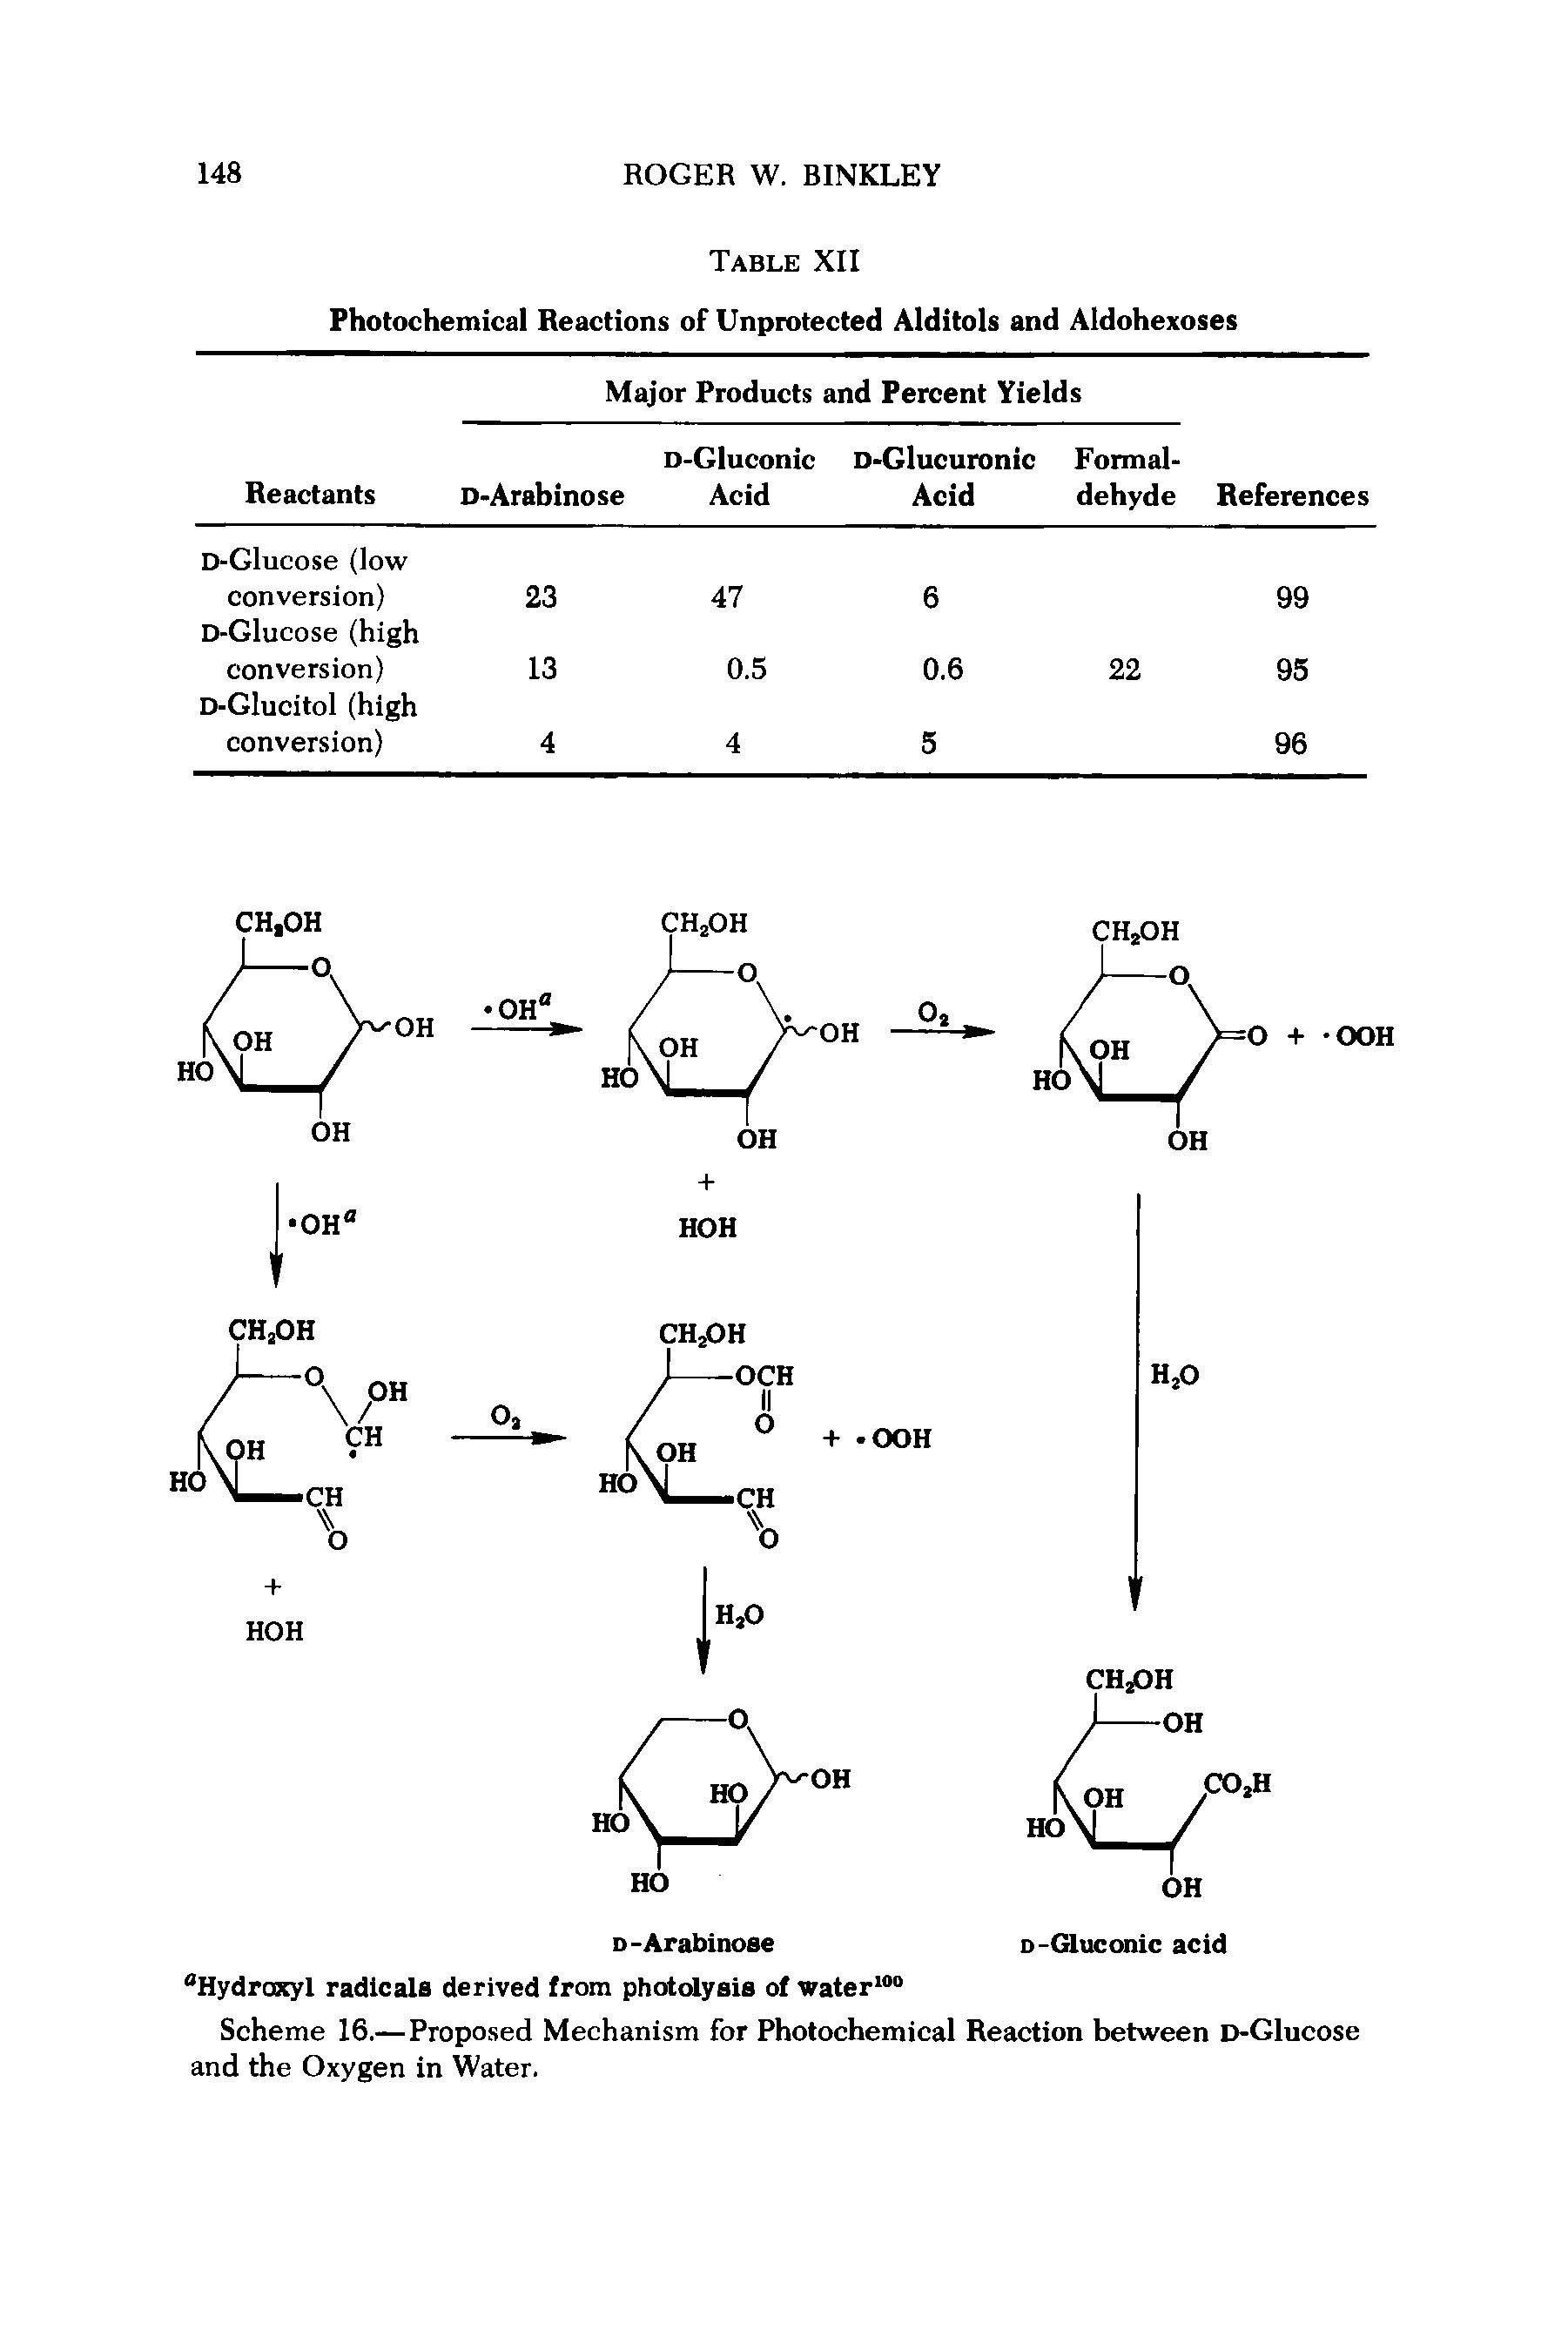 Scheme 16.— Proposed Mechanism for Photochemical Reaction between D-Glucose and the Oxygen in Water.